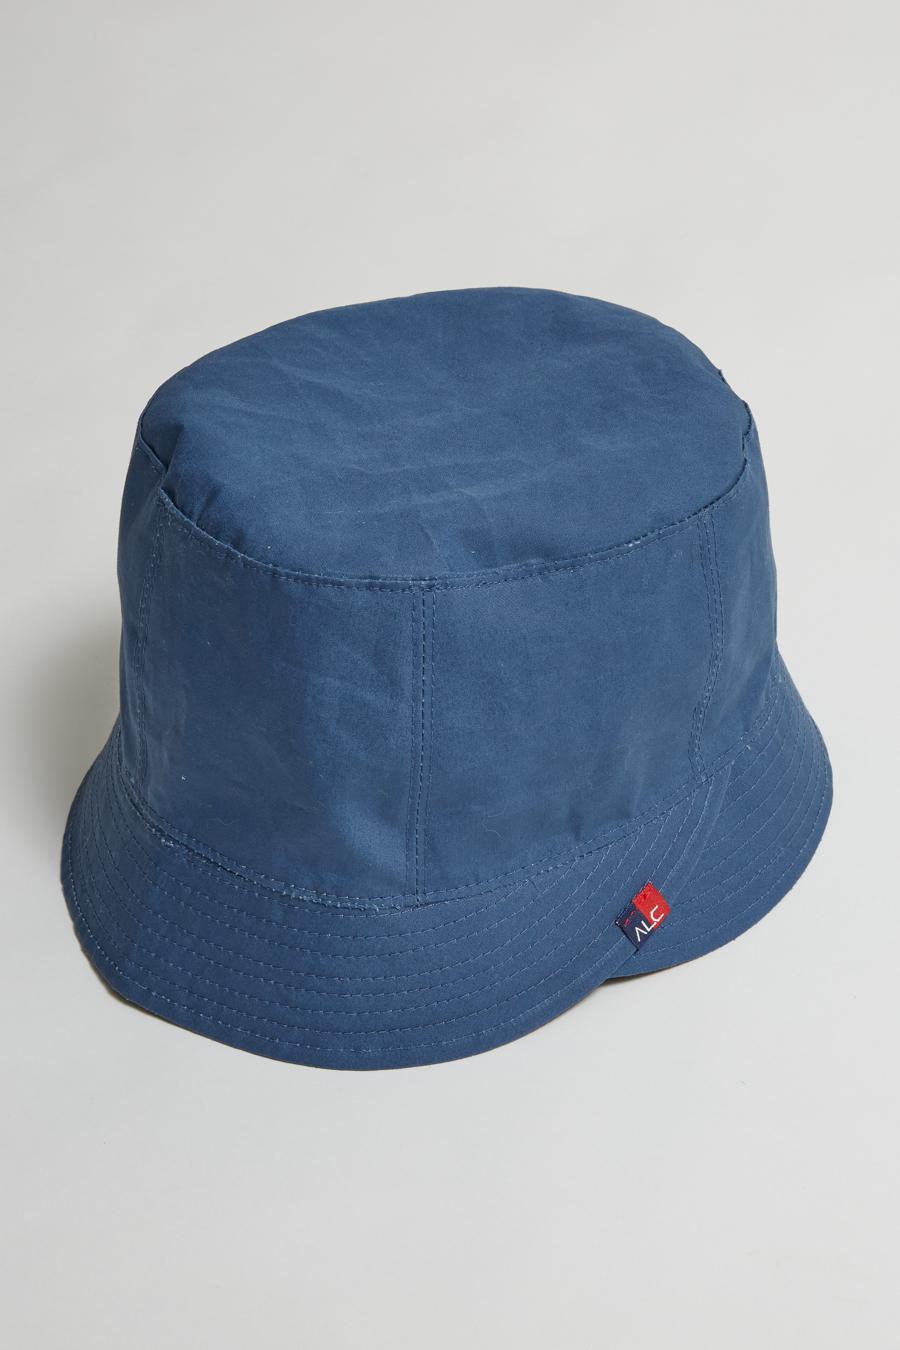 Alexander Lee Chang REVERSIBLE W BLIM HAT BLUE - boys in the band